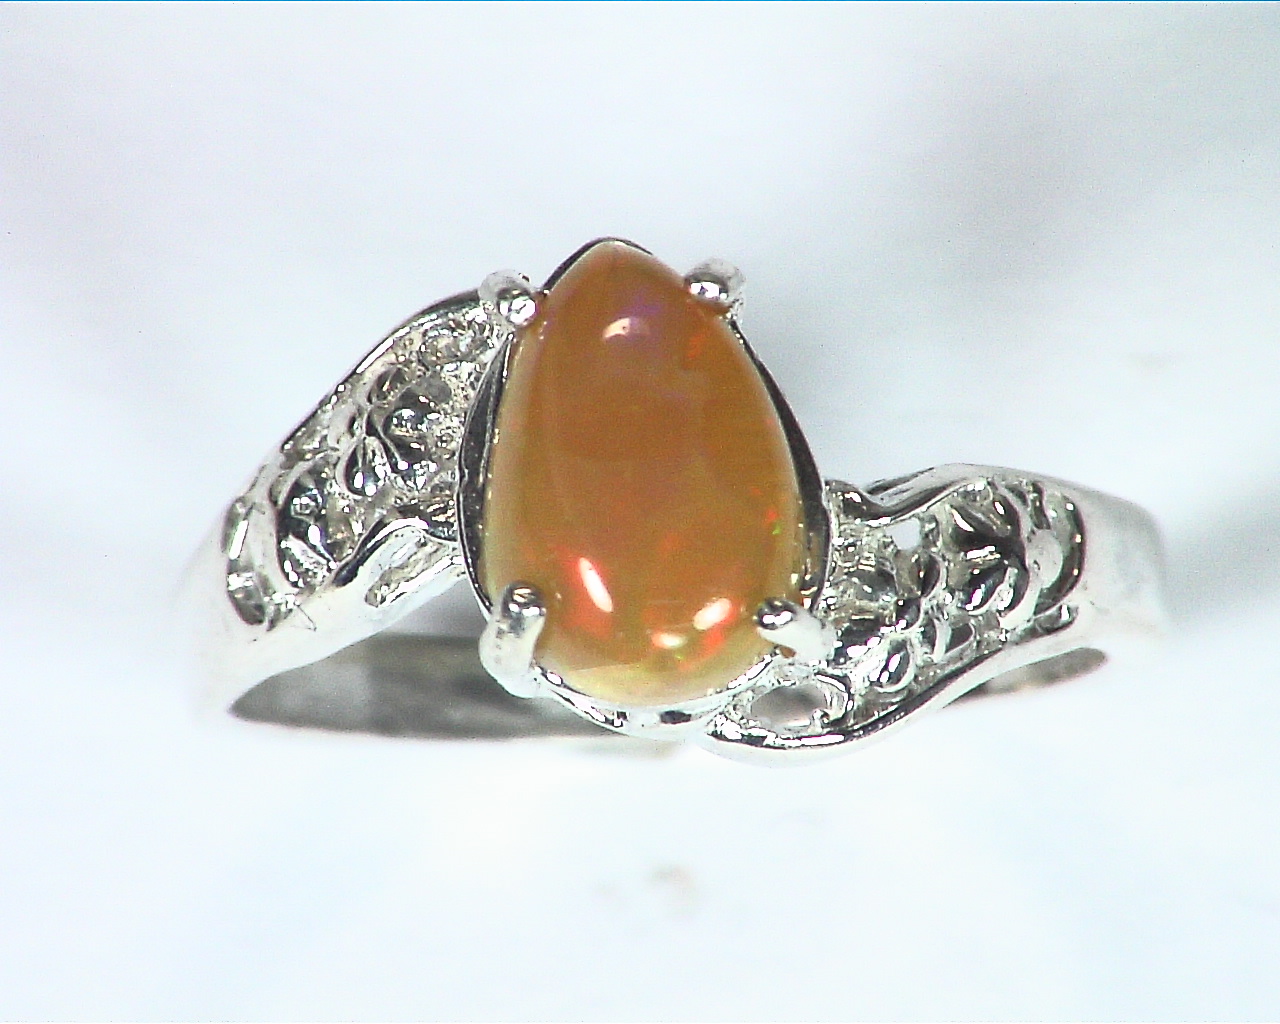 Opal (Mexican) Genuine Gemstone in Sterling silver Ring RSS,600 2